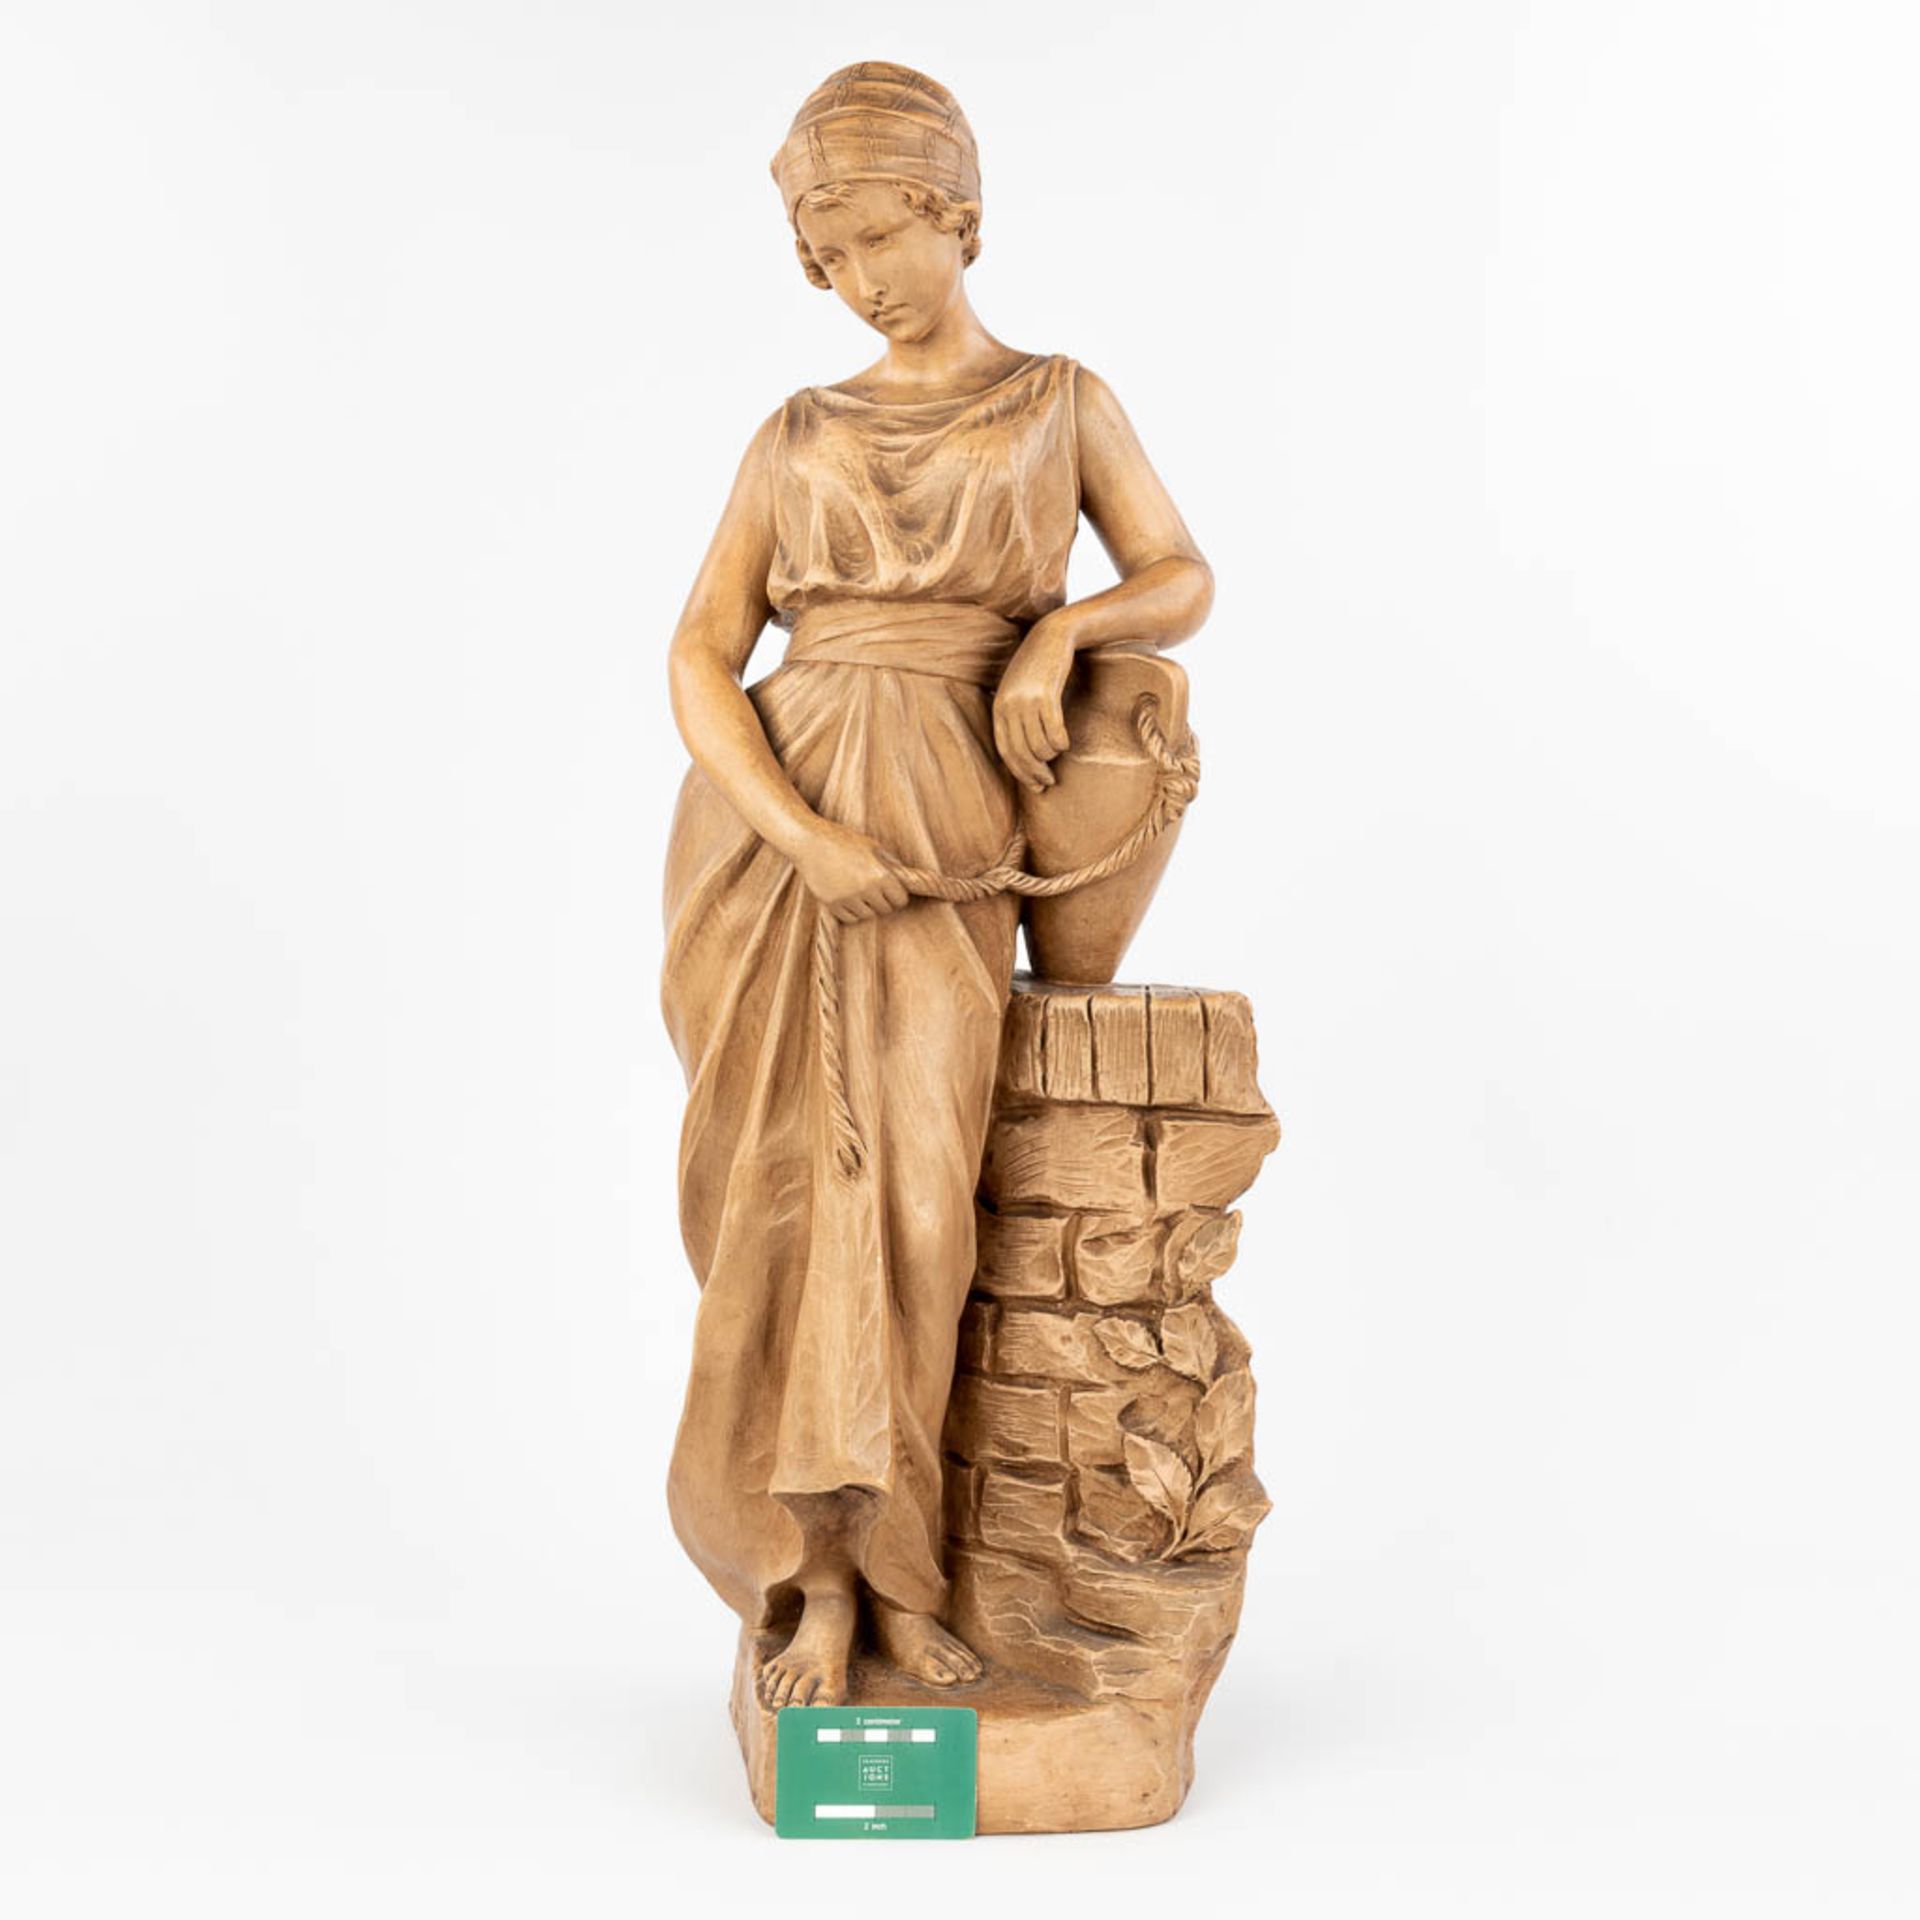 Richard AURILI (1834-c.1914) 'The Water carrier,' a figurine made of terracotta. (H:75,5 cm) - Image 9 of 12